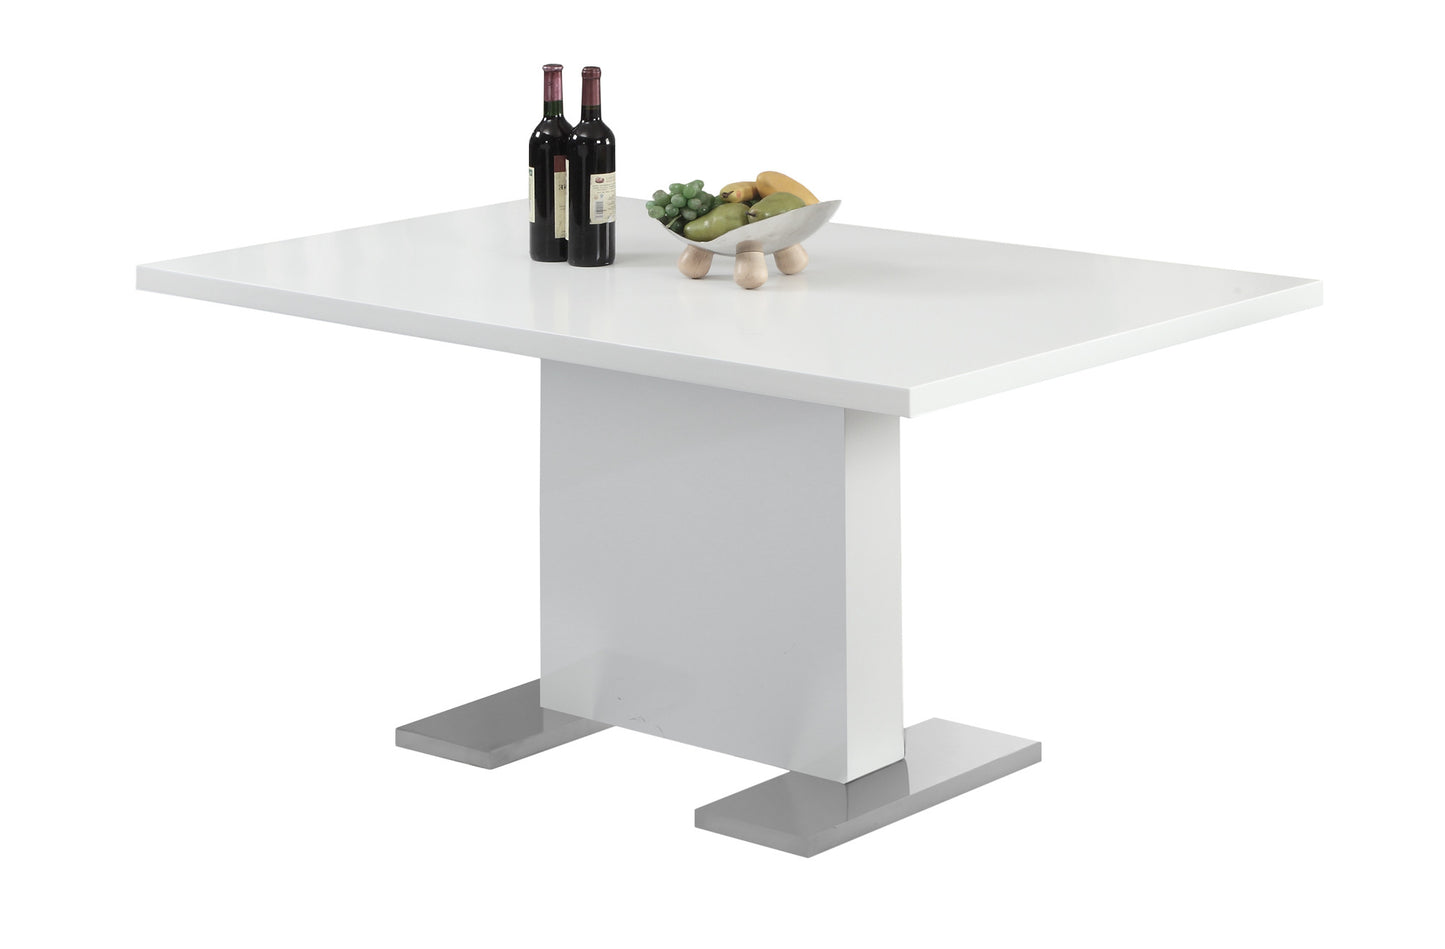 59" White And Gray Metal Pedestal Base Dining Table